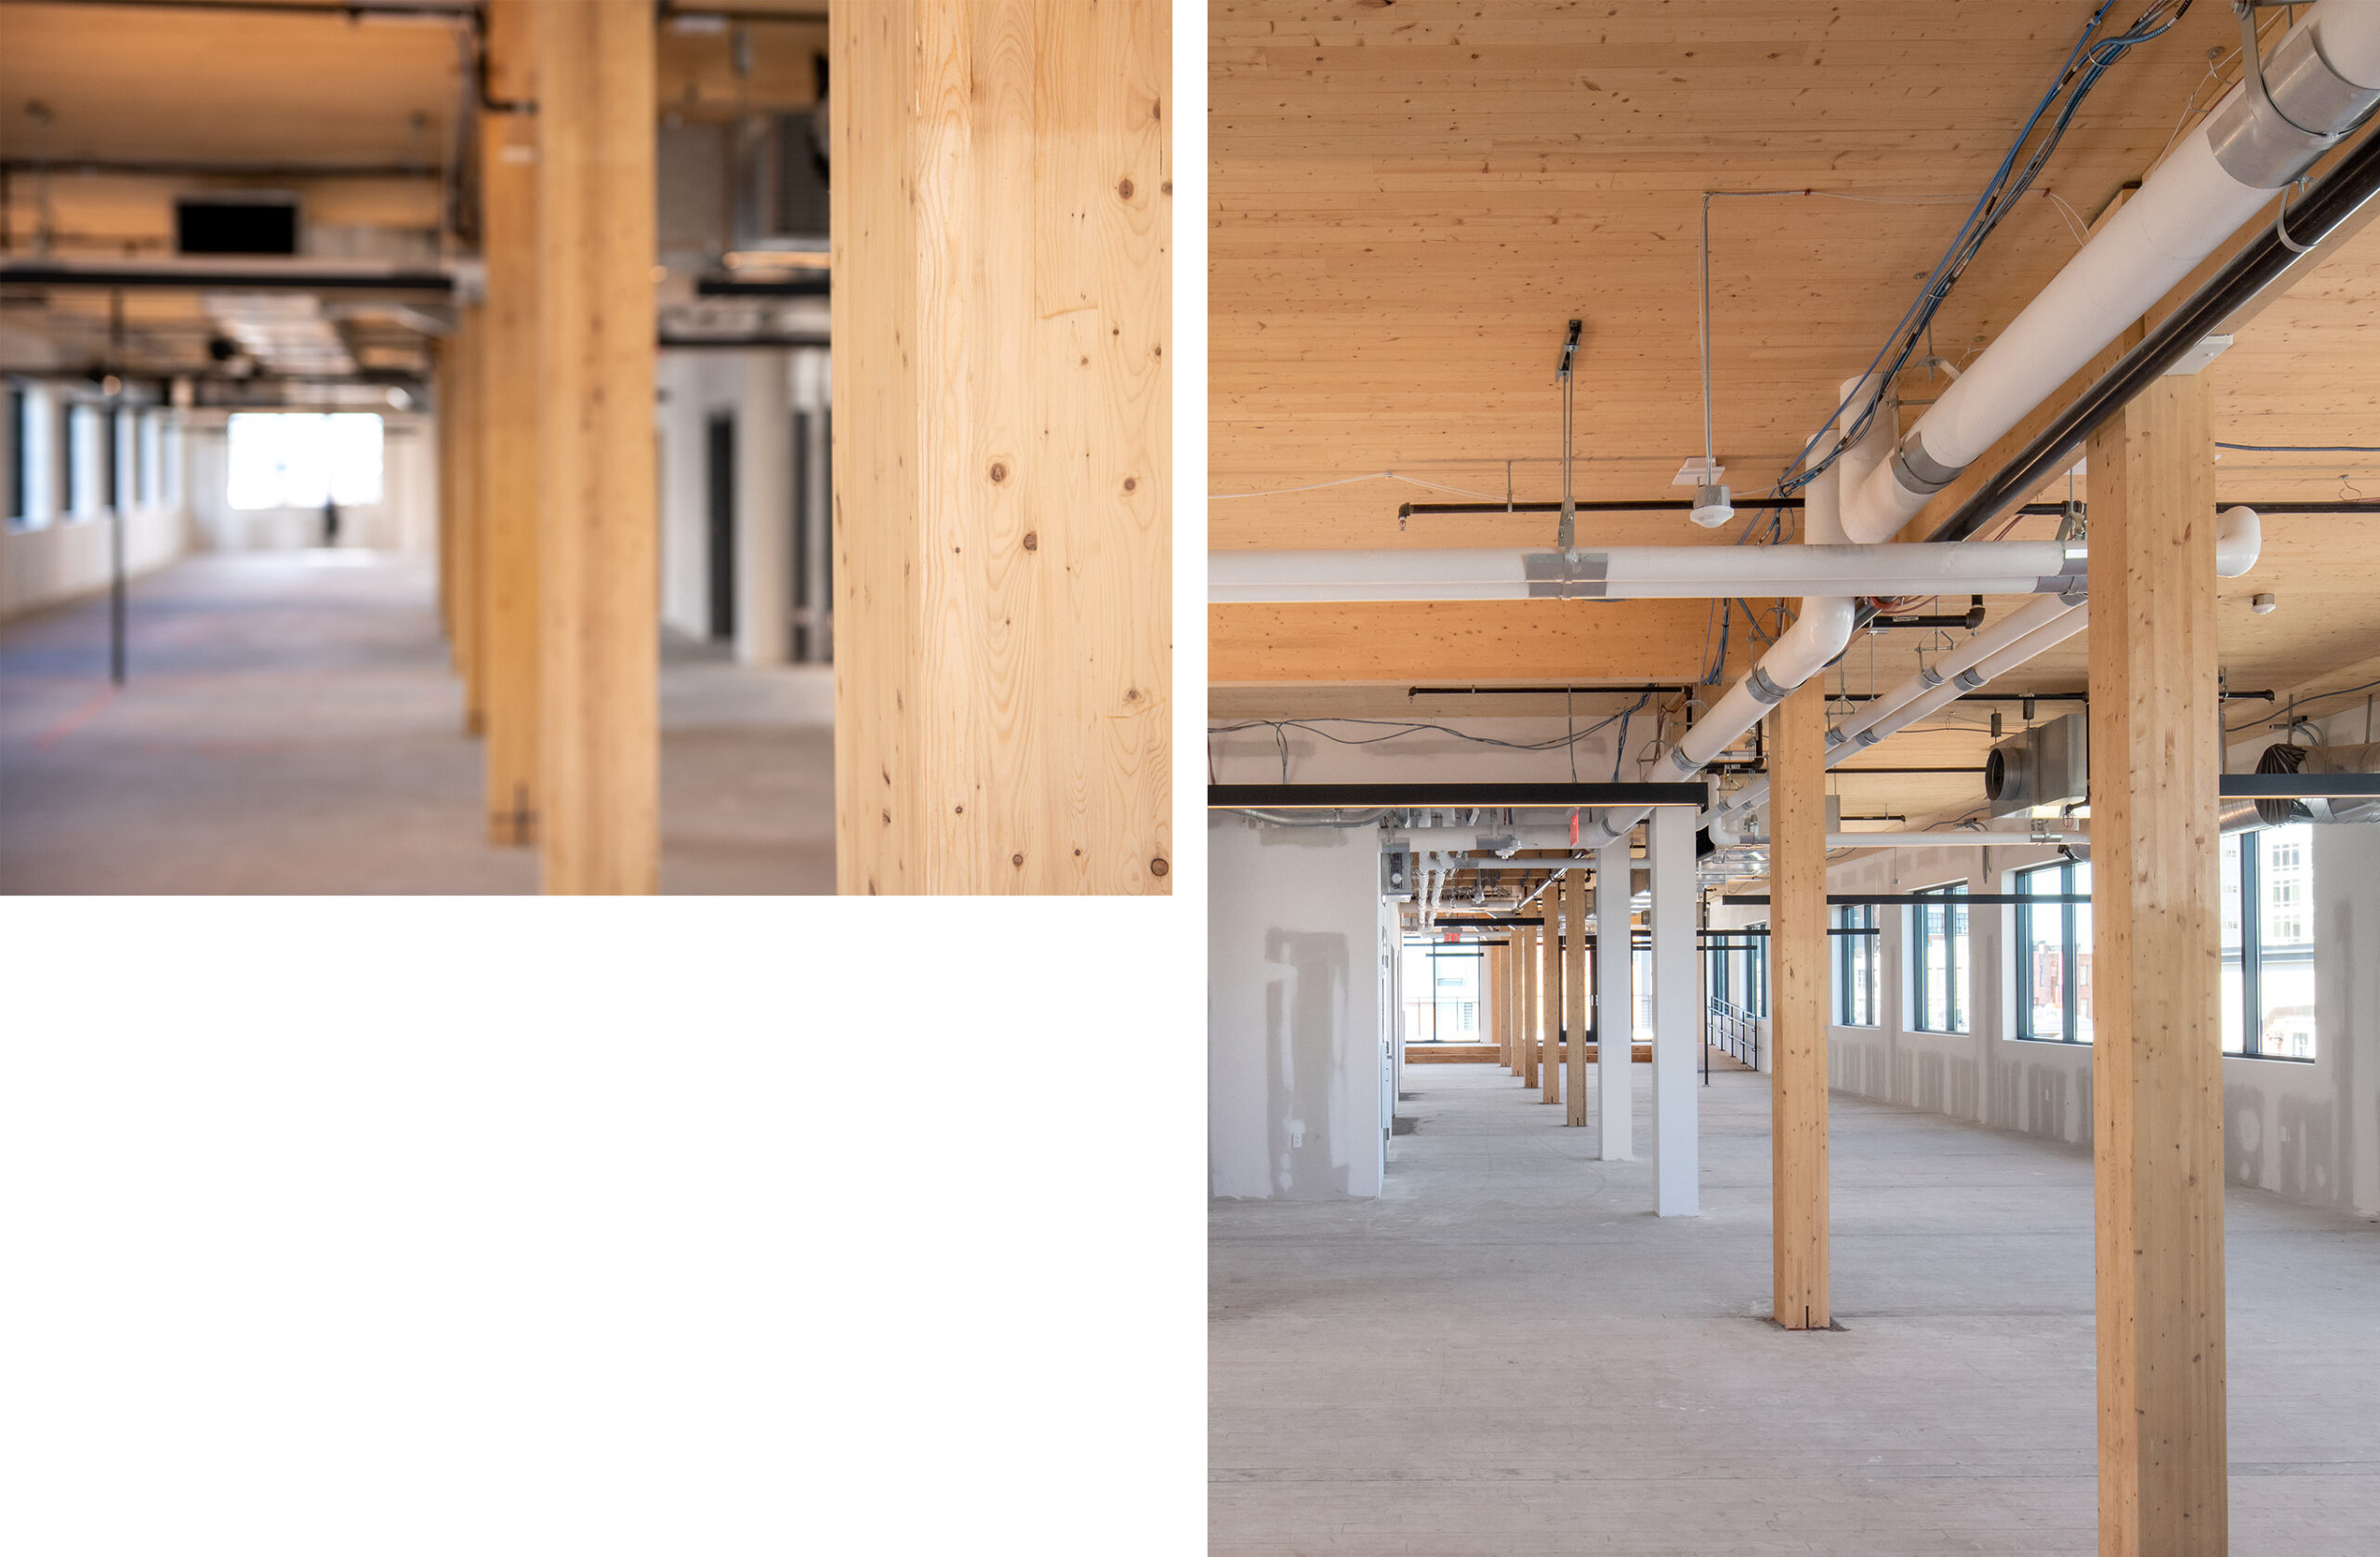 Cross laminated timber details